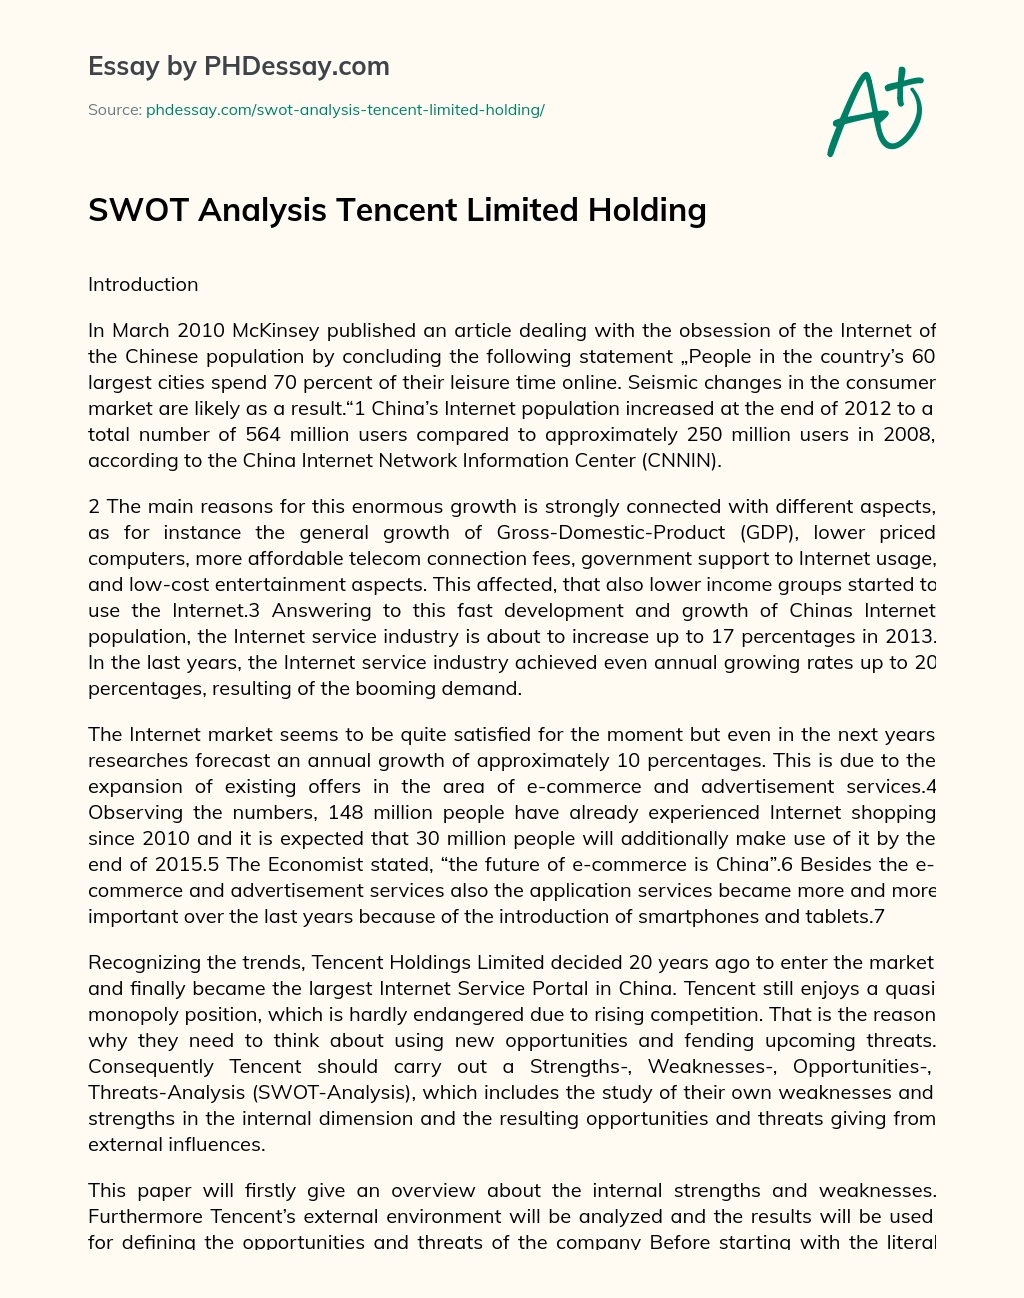 SWOT Analysis Tencent Limited Holding essay